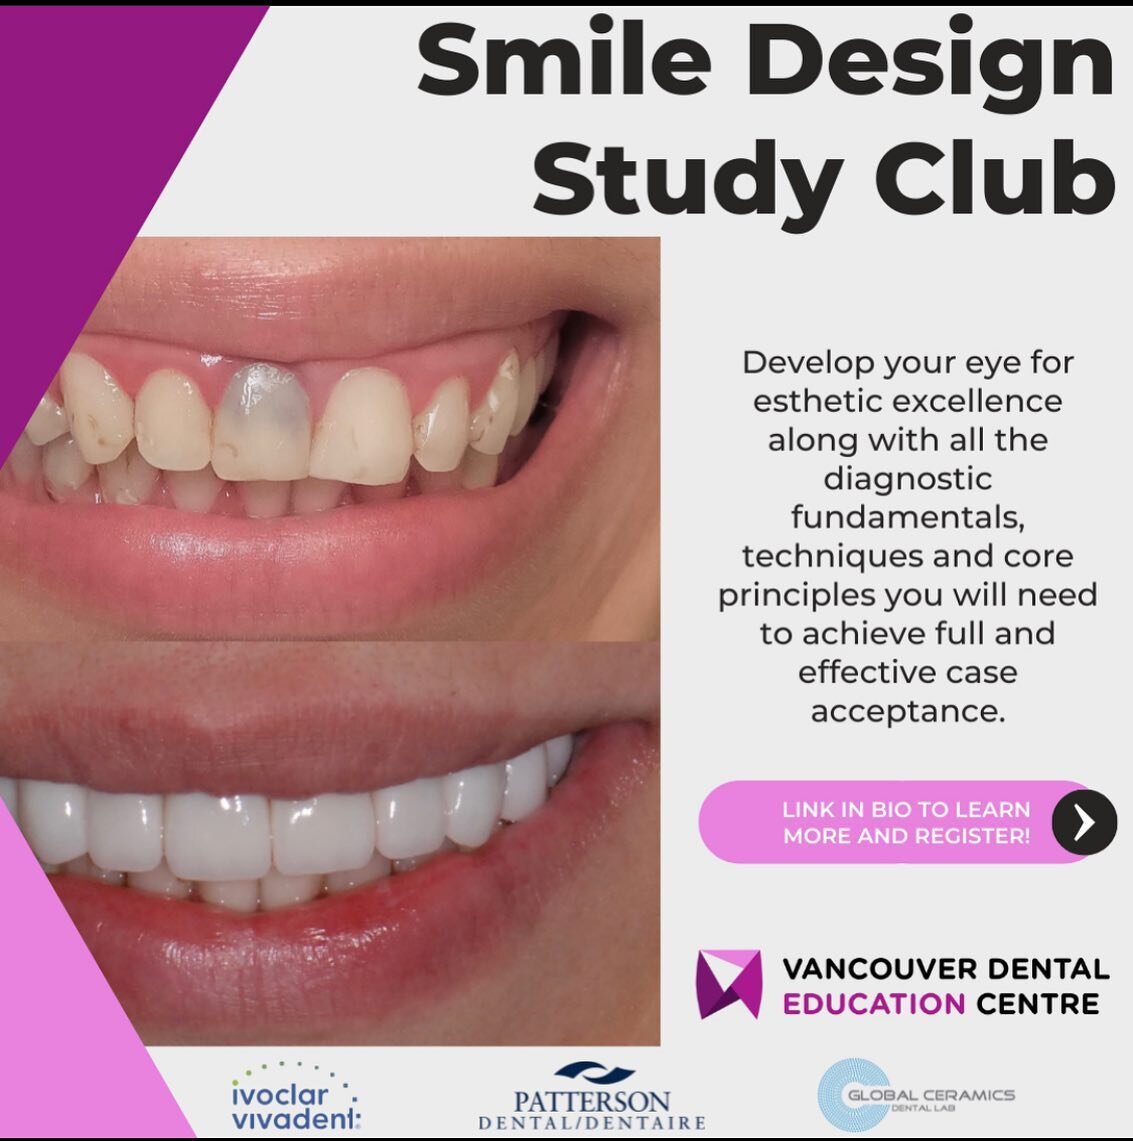 Smile design is back this spring! Visit @vdeceducation for more info!